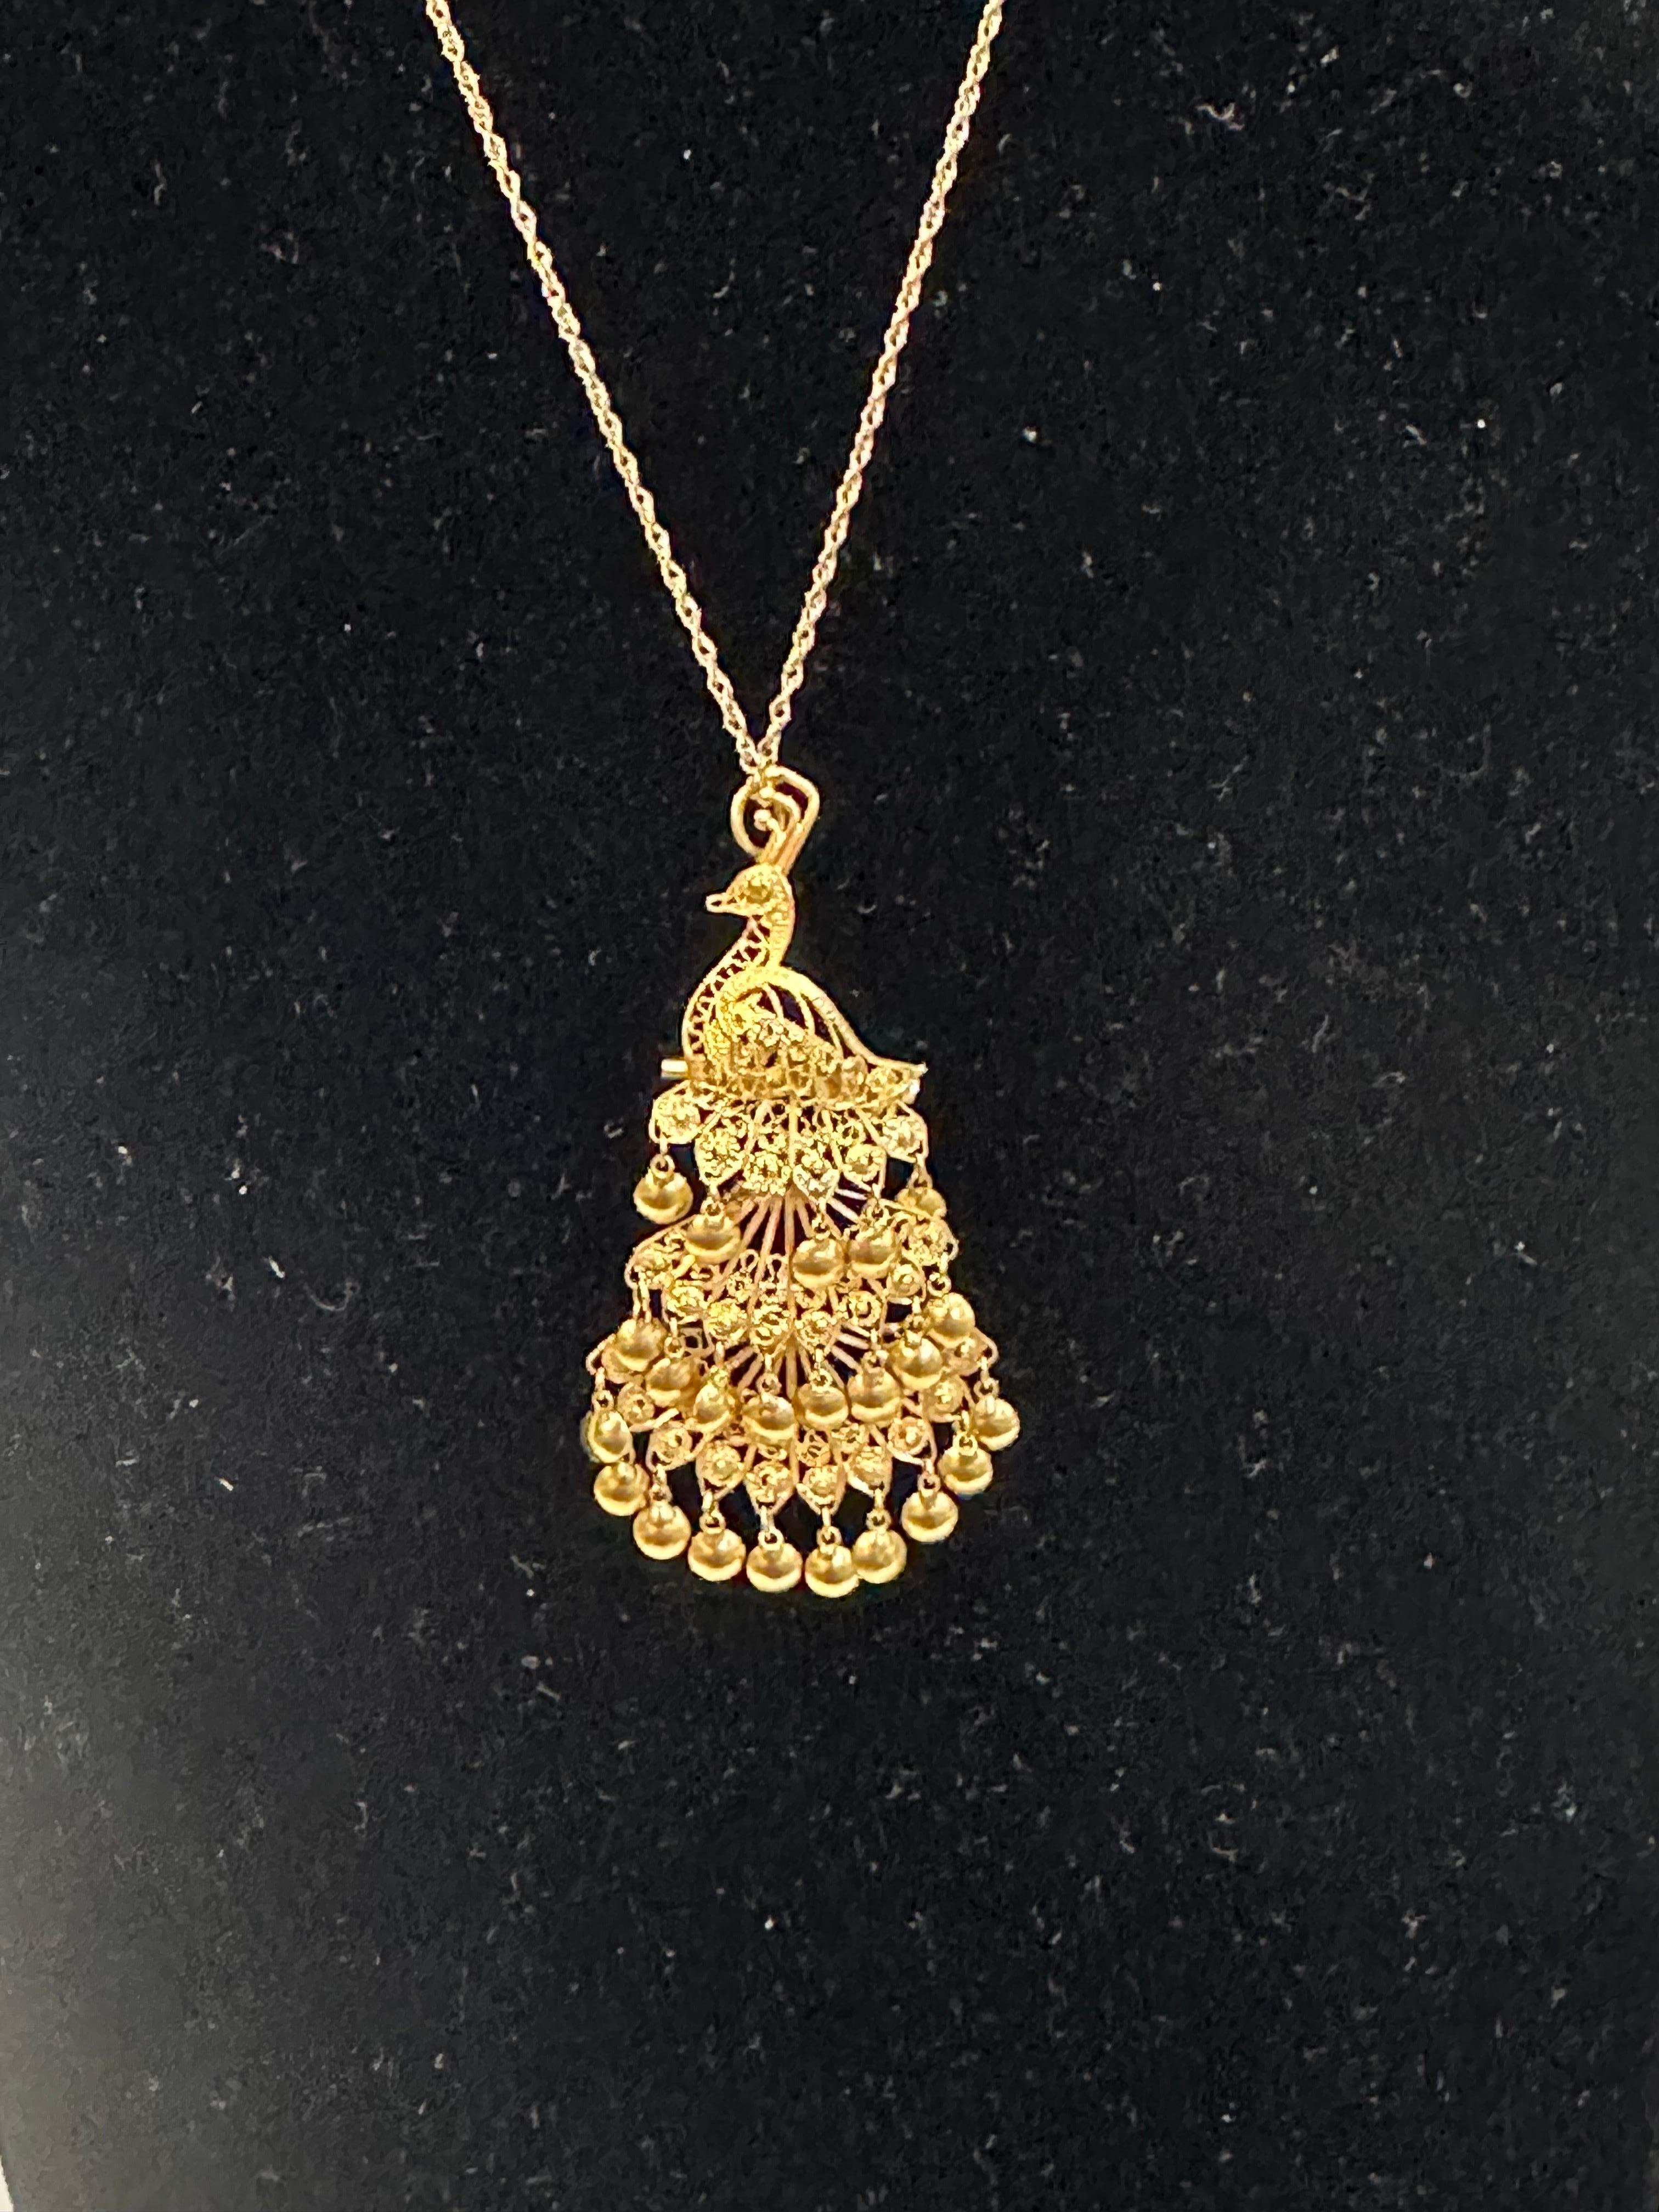 Women's or Men's Vintage 24 Kt Yellow Gold 3.4 Gm Peacock Pin / Pendant + 14 K Chain Necklace